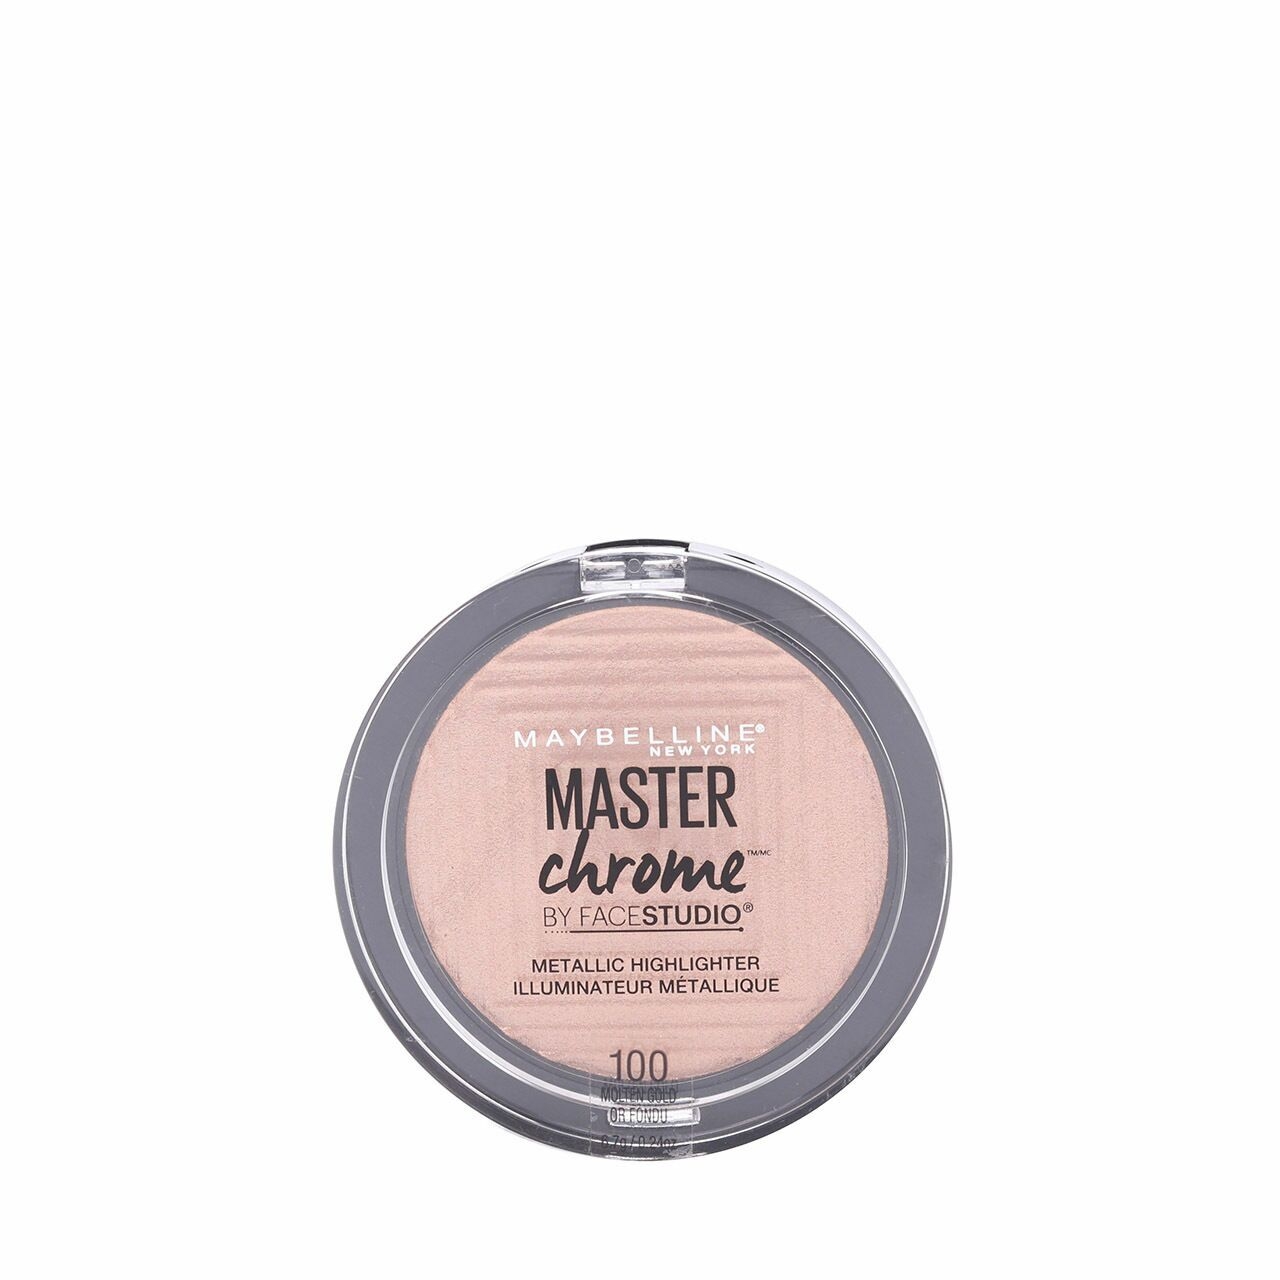 Maybelline Master Chrome by Face Studio Metallic Highlighter - 100 Molten Gold Faces